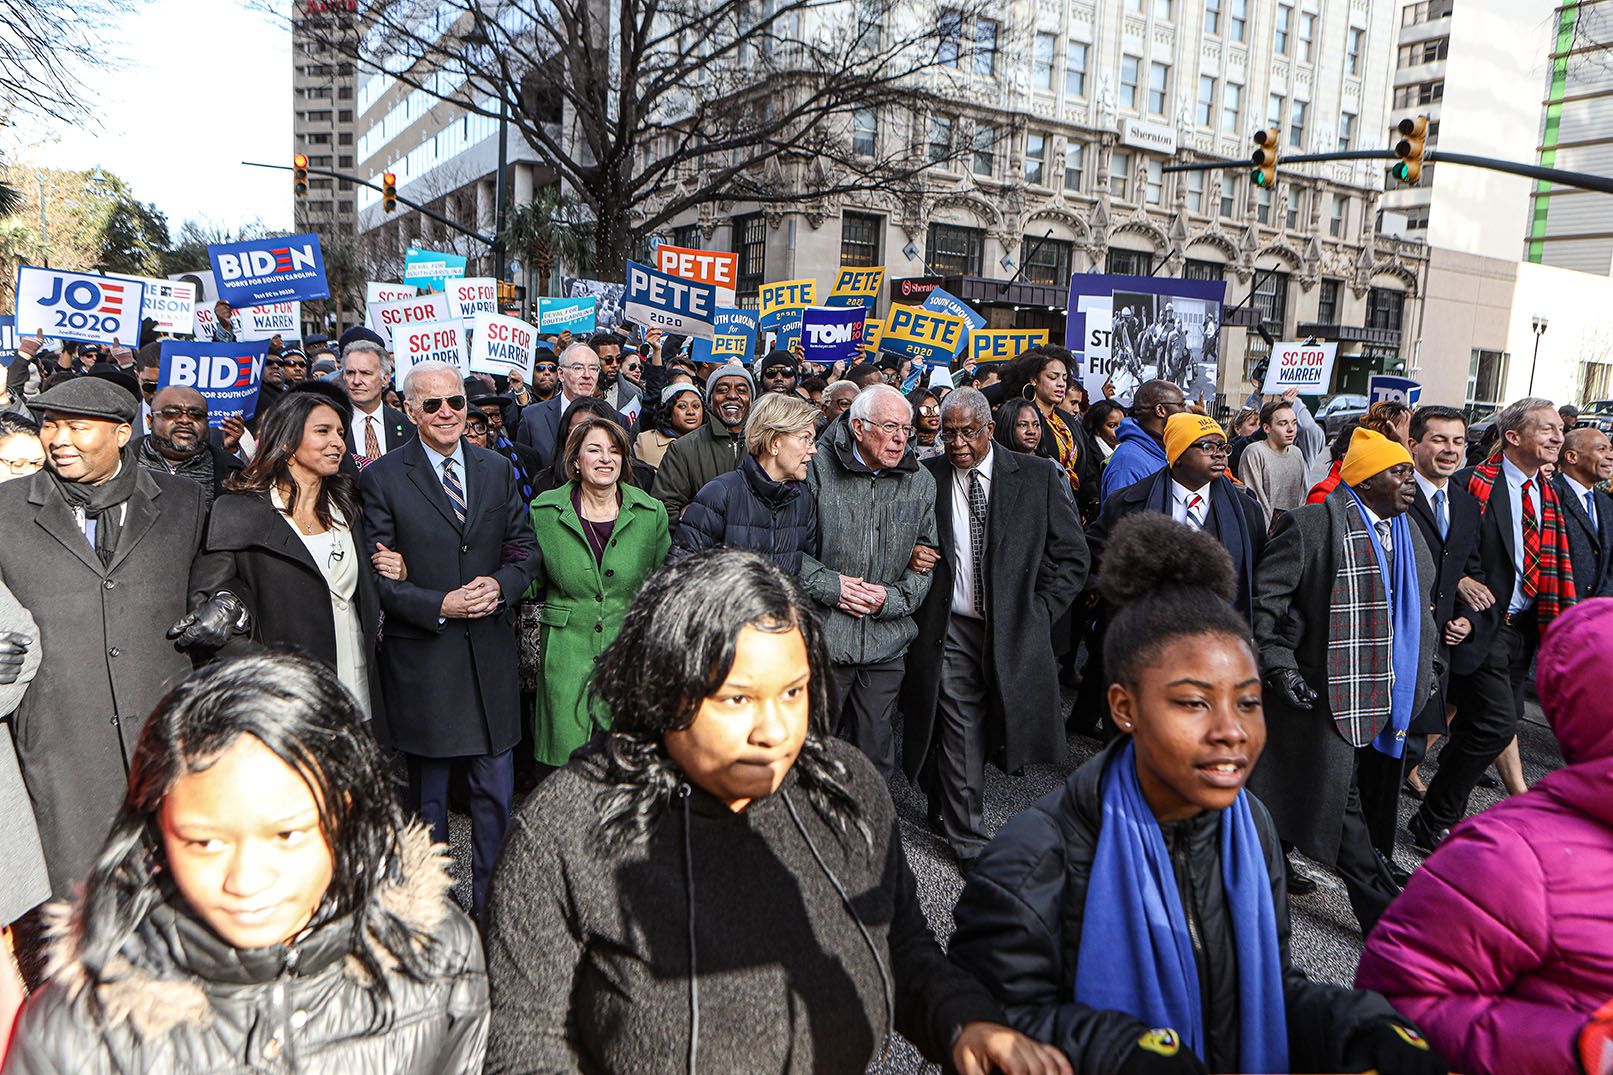 Democratic candidates for president march at King Day at The Dome Rally in Columbia, South Carolina a month before the "First in the South" primary election. Image by Perry McLeod / Shutterstock. United States, 2020.